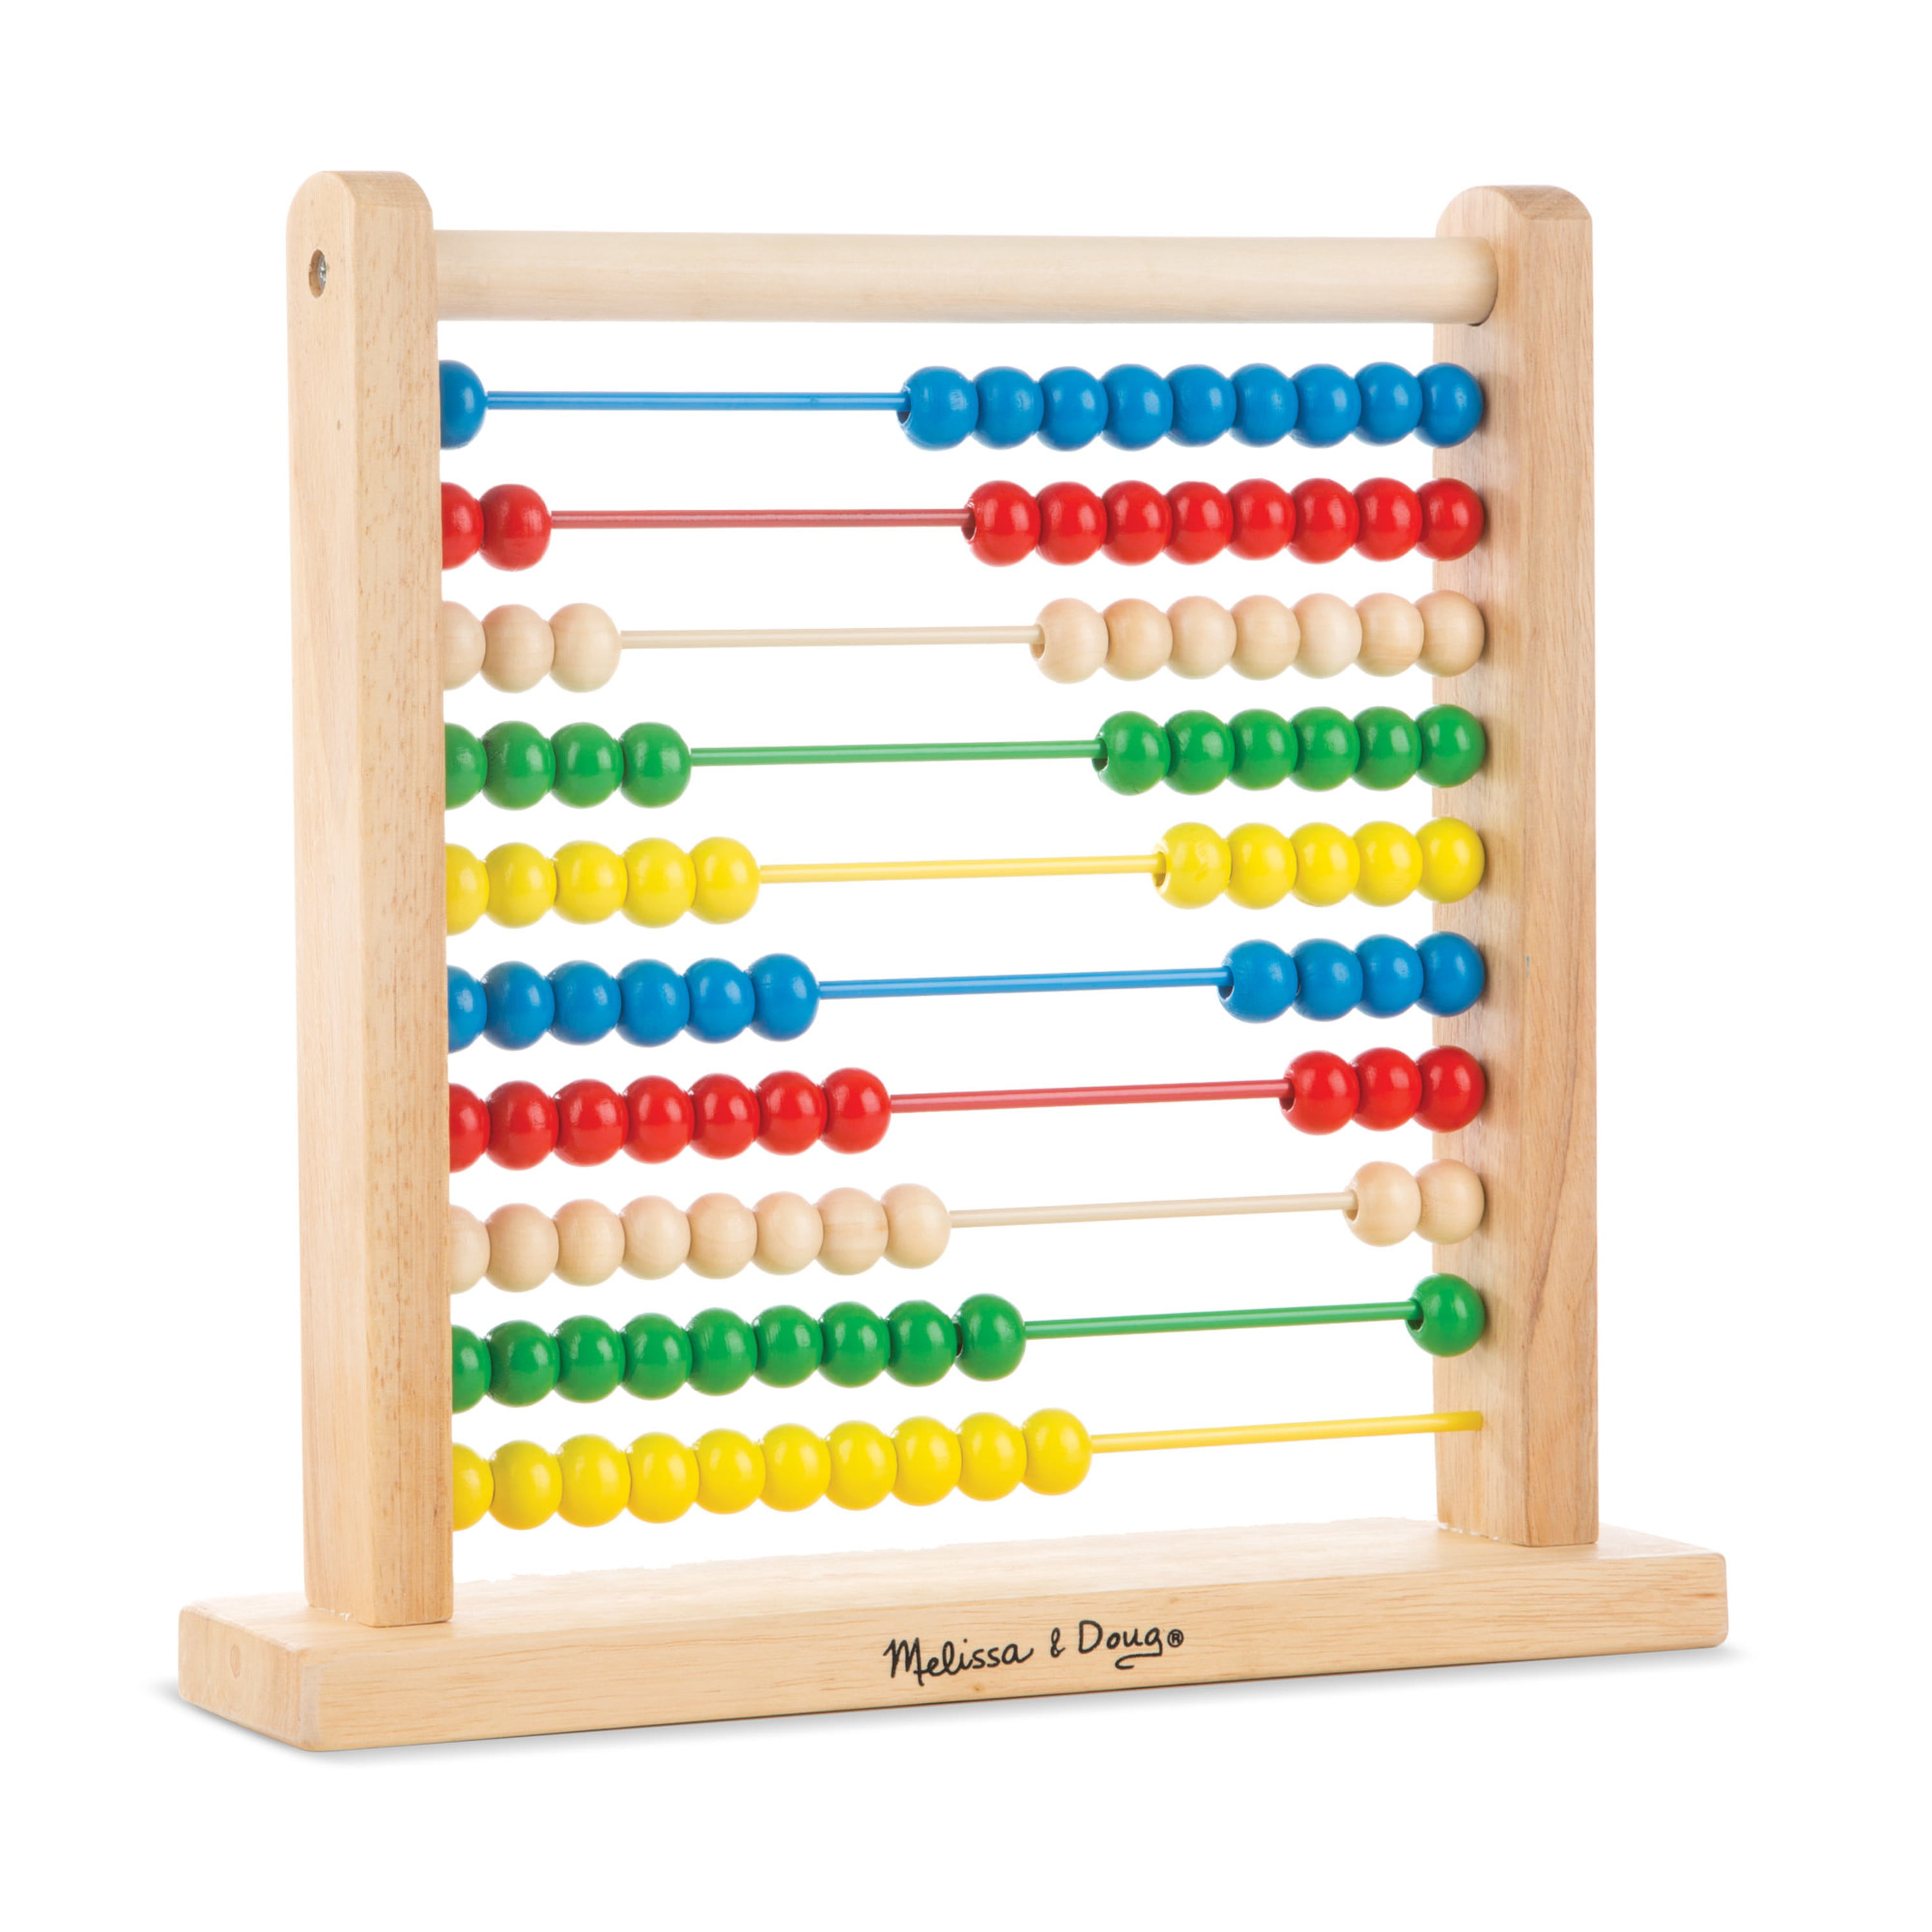 Wooden Children's Counting Bead Abacus Maths Educational Kids Eucation Toy DB 